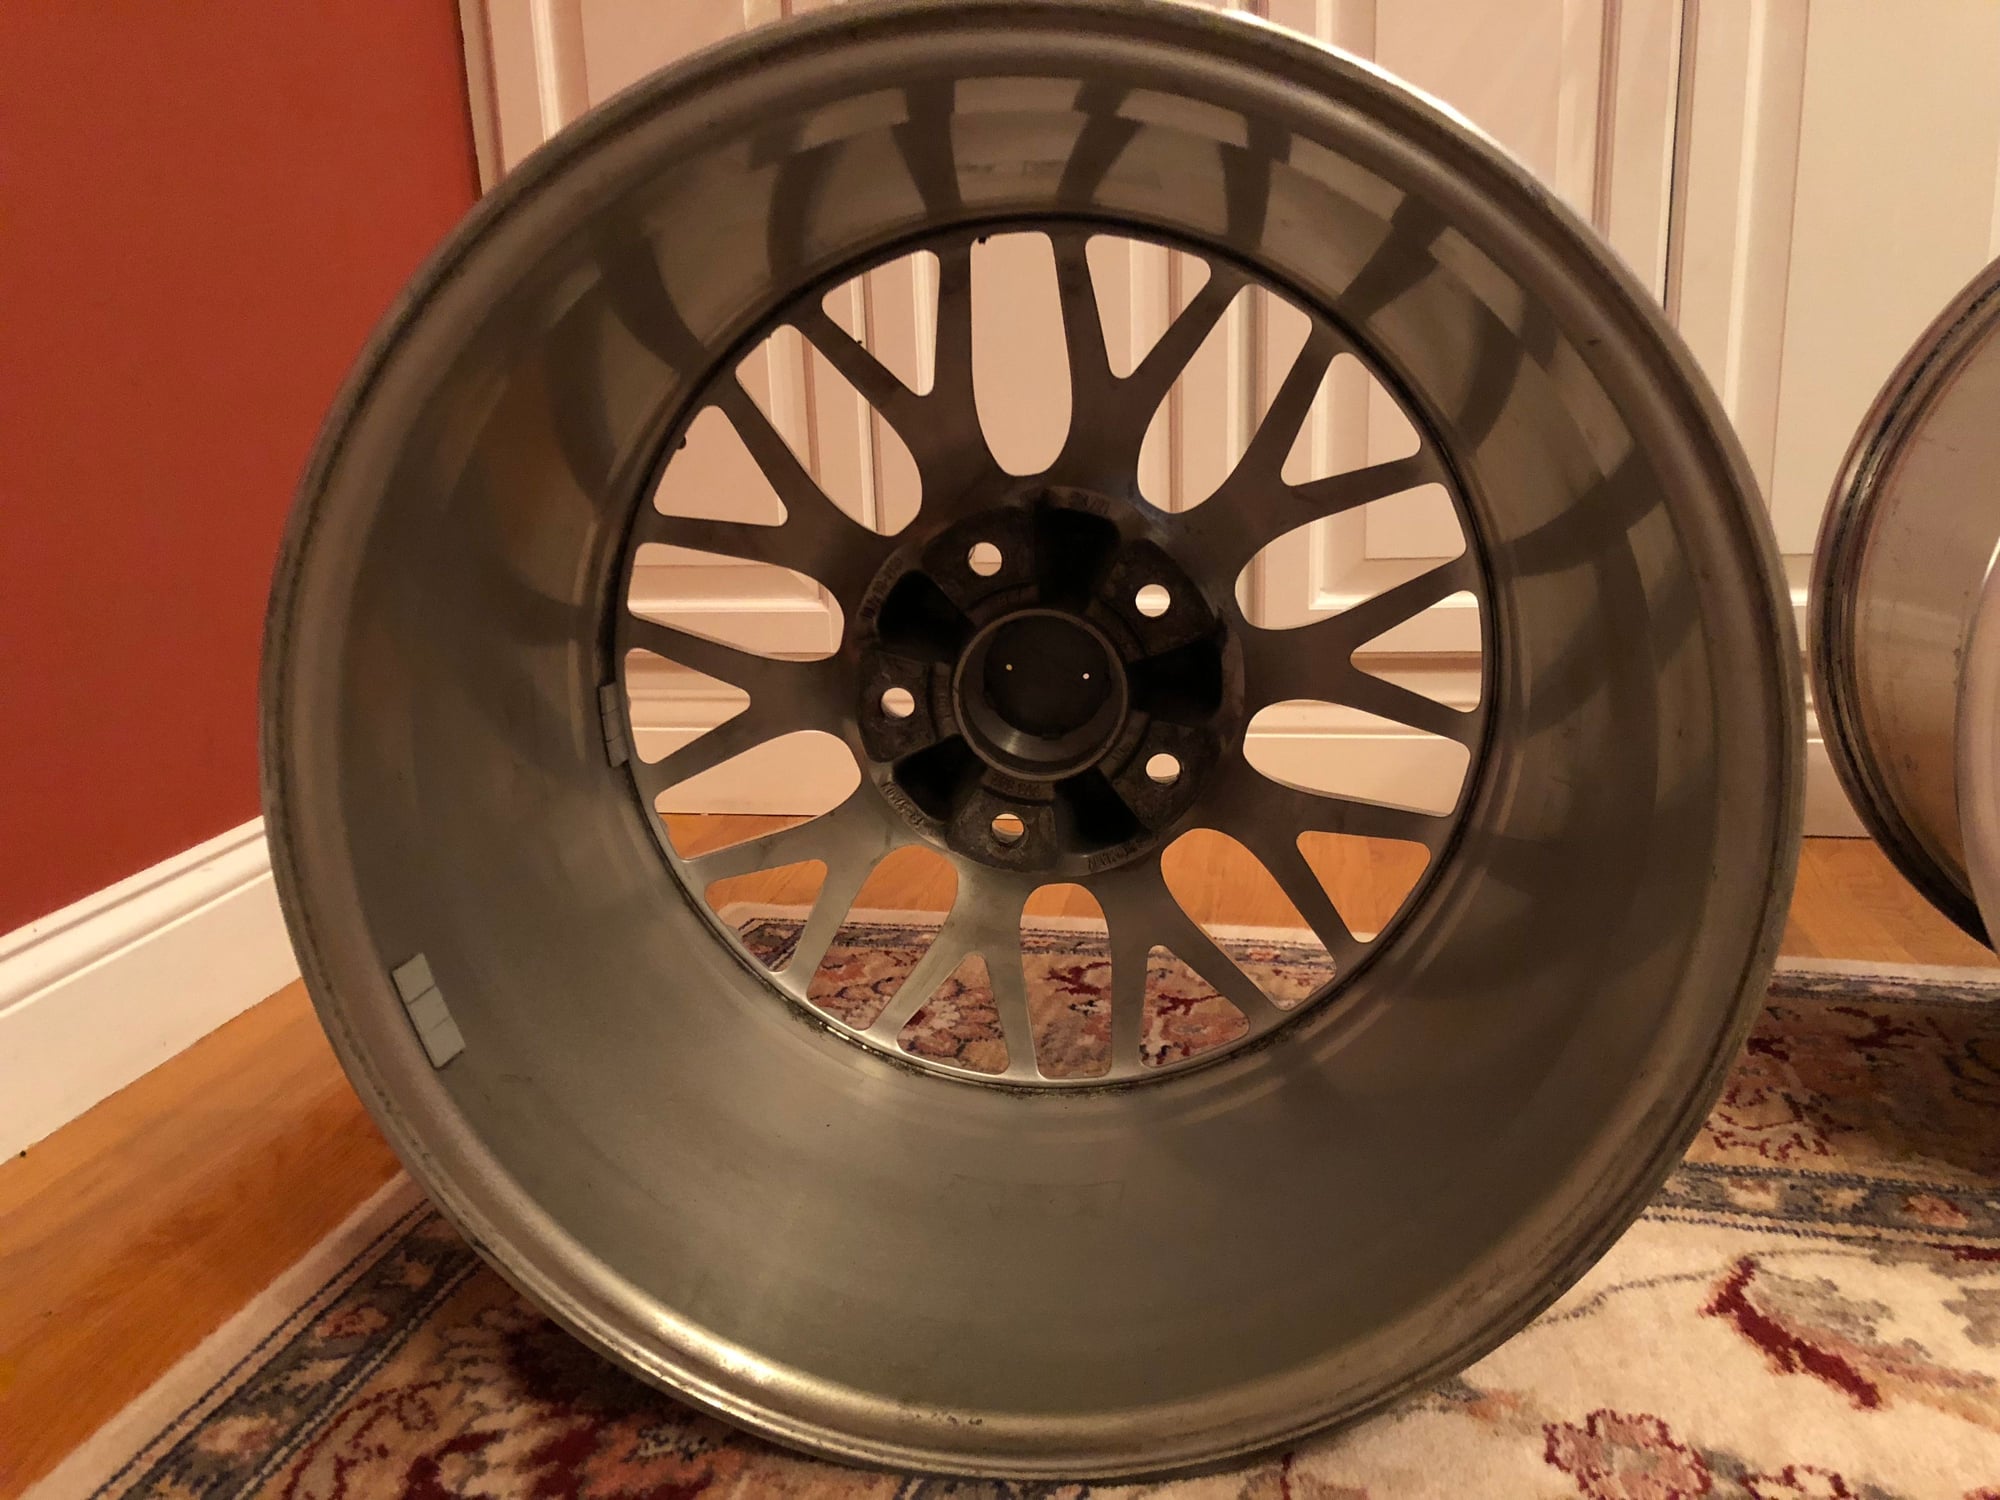 Wheels and Tires/Axles - OEM 18" BBS Sport Classic II Wheels - Used - 1990 to 2004 Porsche 718 Spyder - Boston, MA 02090, United States